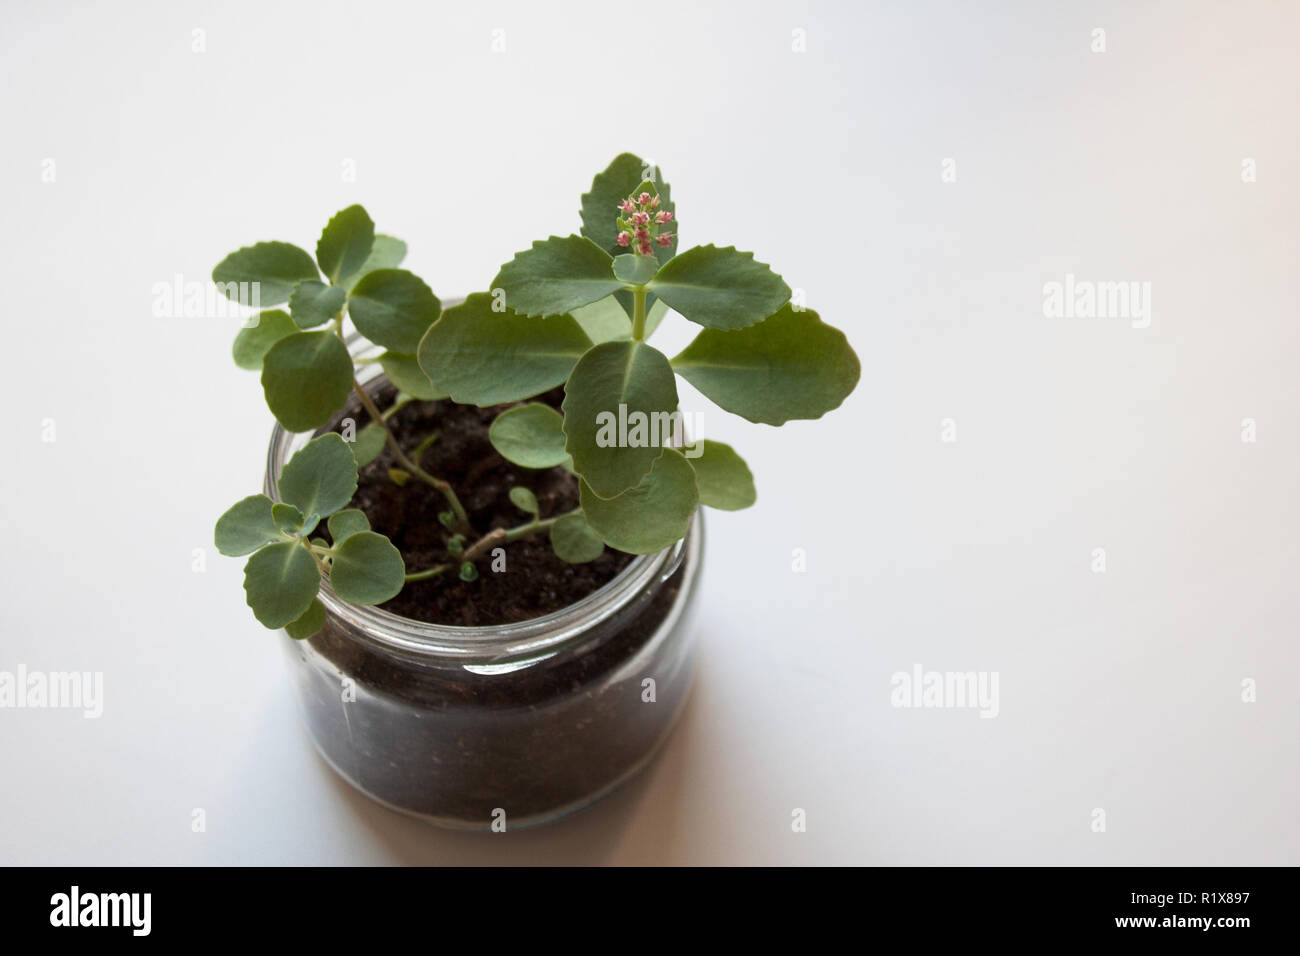 Sedum sieboldii Autumn Joy plant in small glass jar blossoming with pink flowers isolated on white background Stock Photo